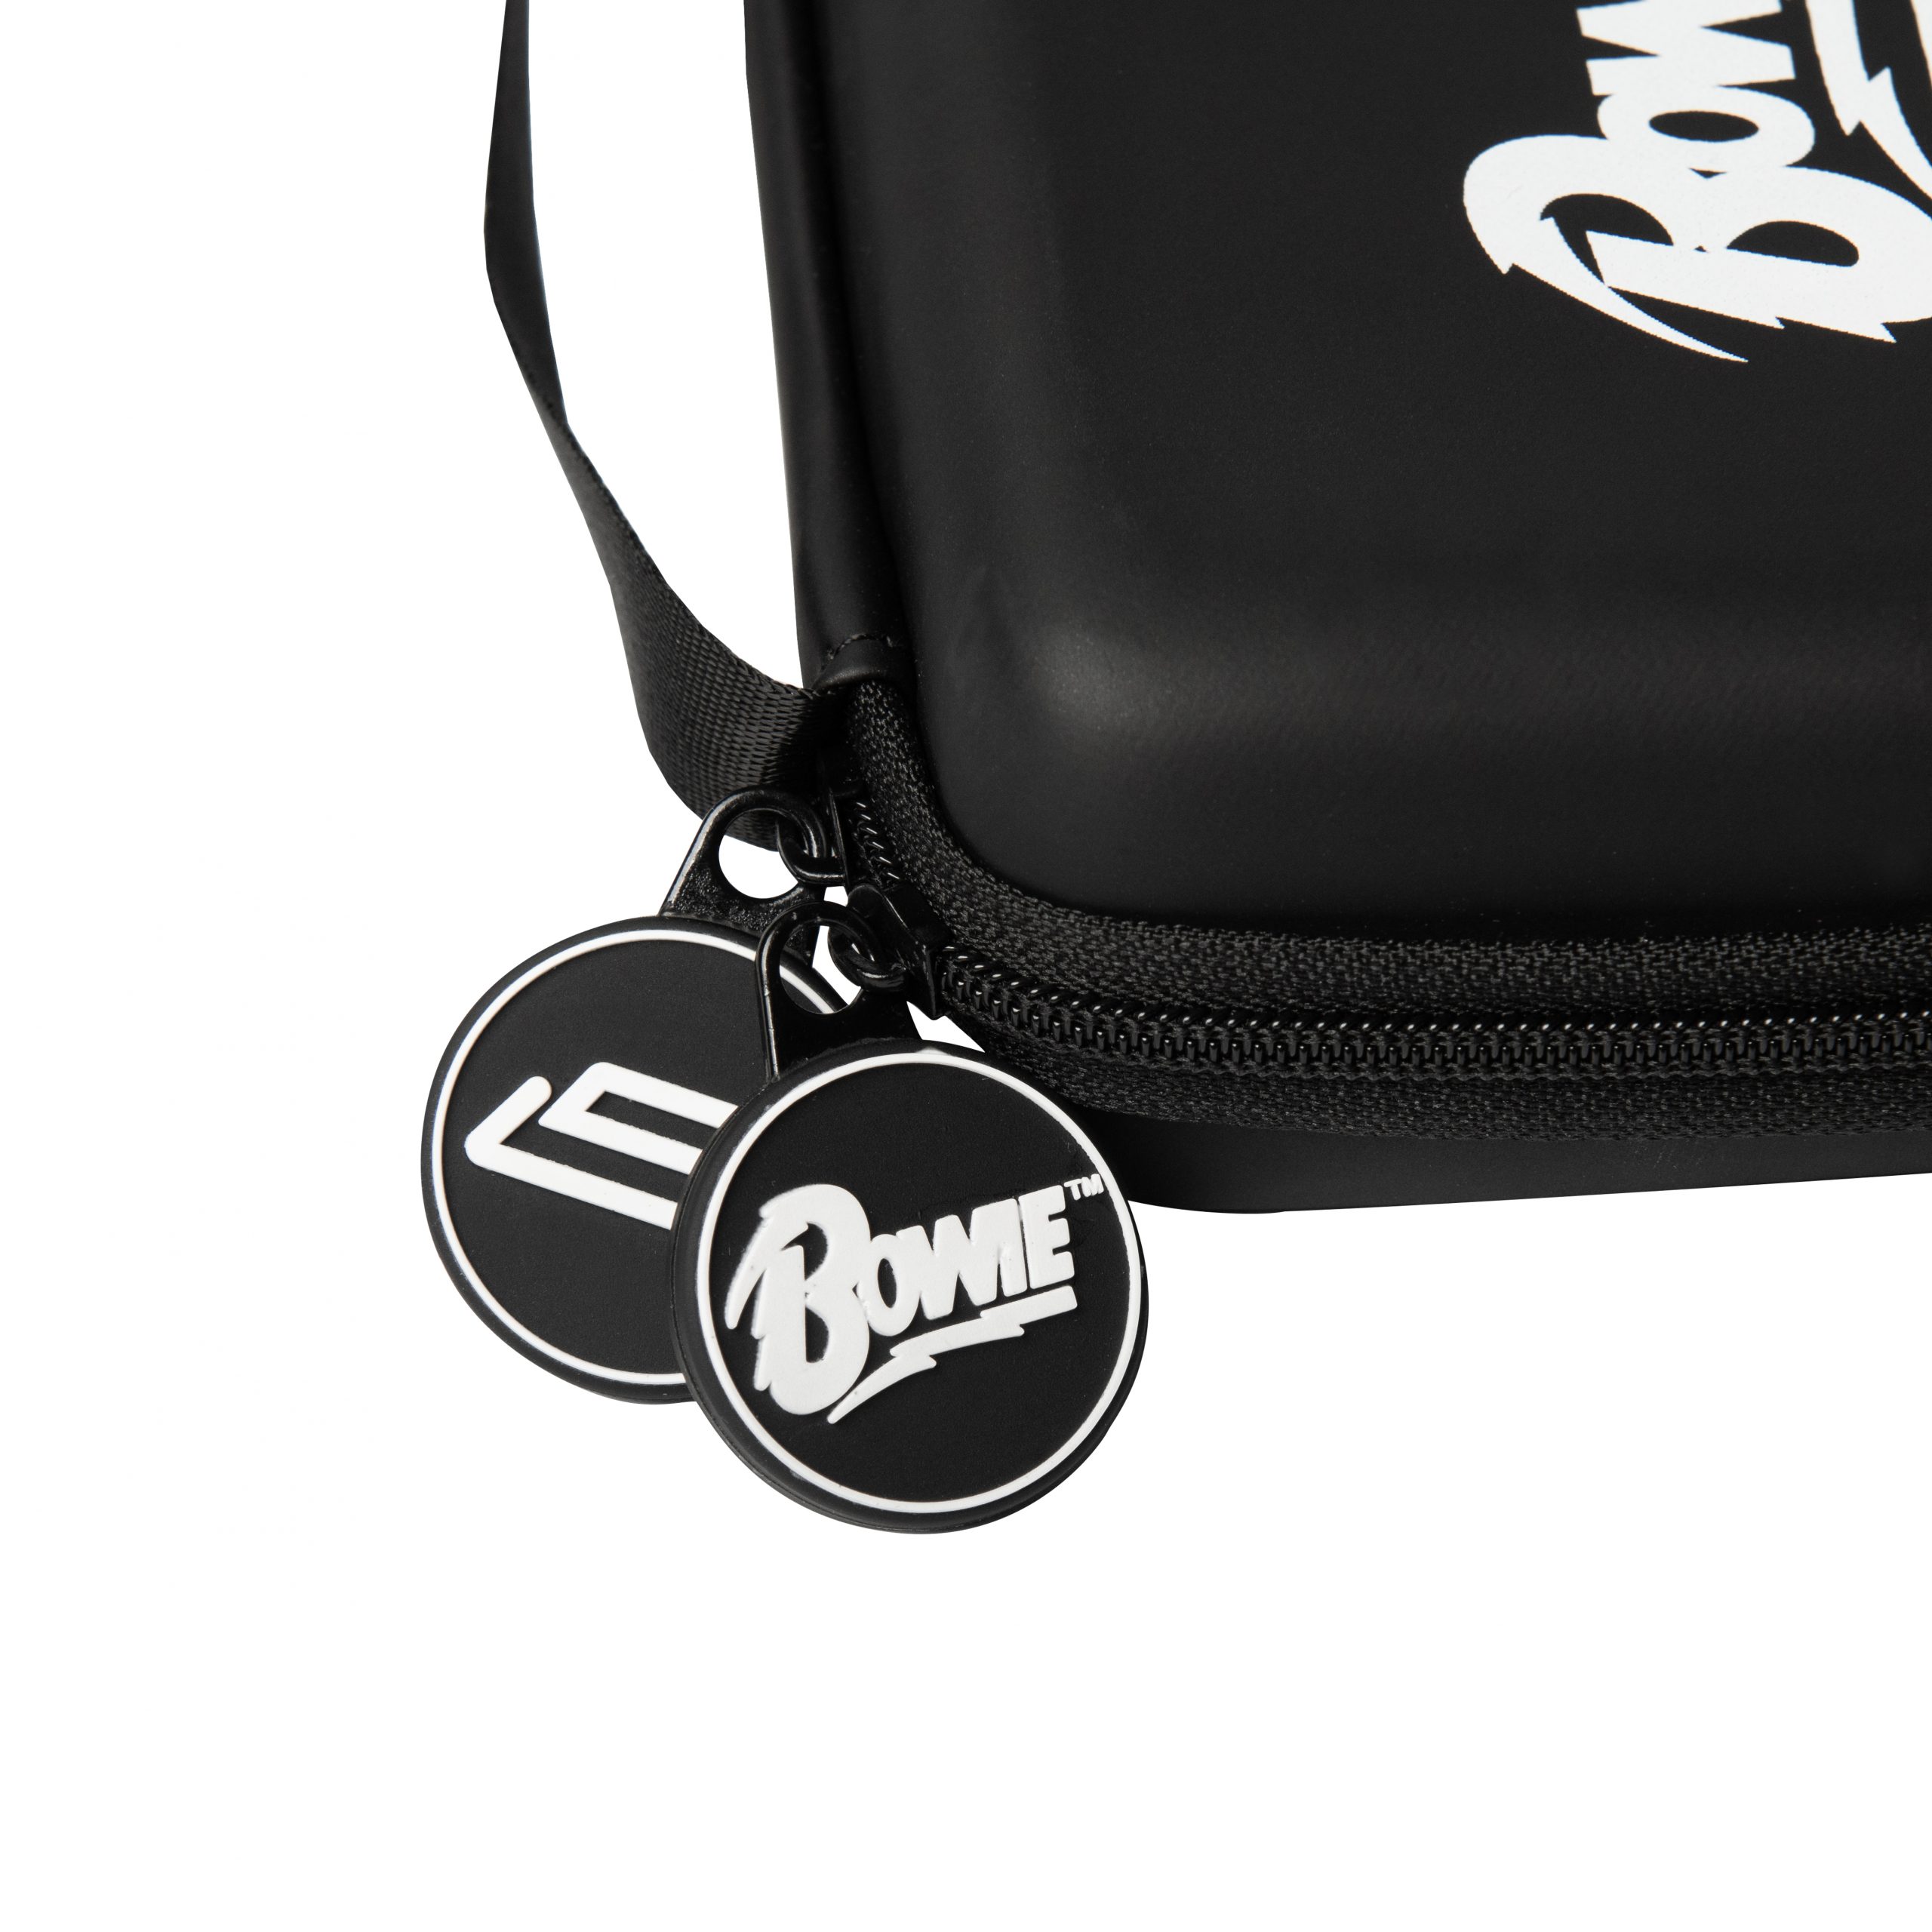 Bowie Stylophone Carry Case Zipper Tags